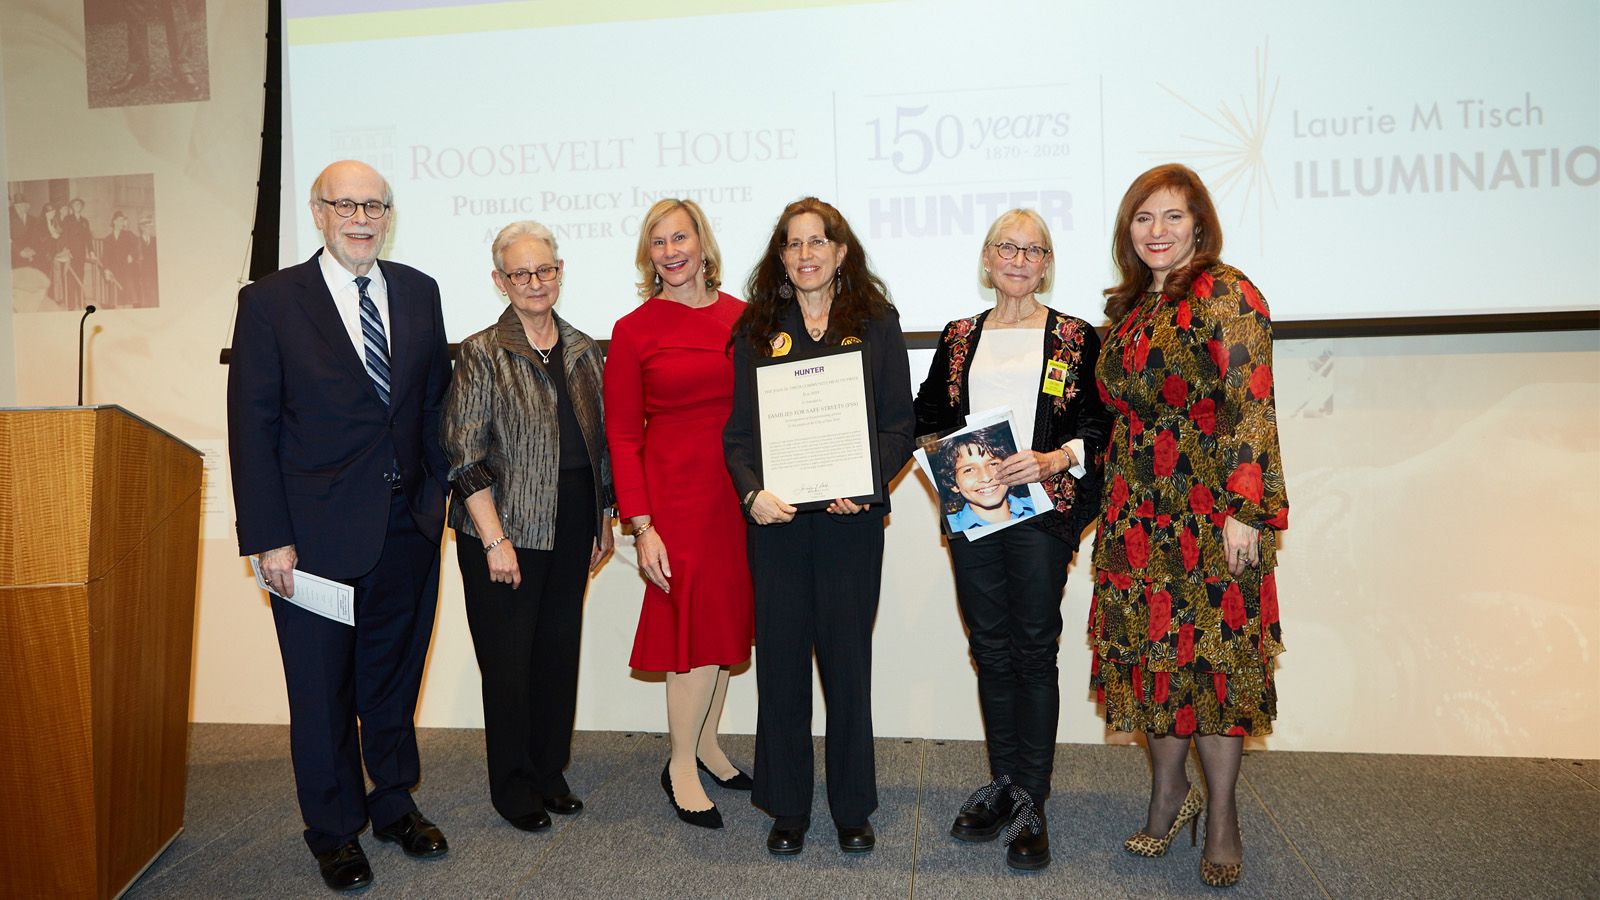 Joan H. Tisch Community Health Prize for Excellence